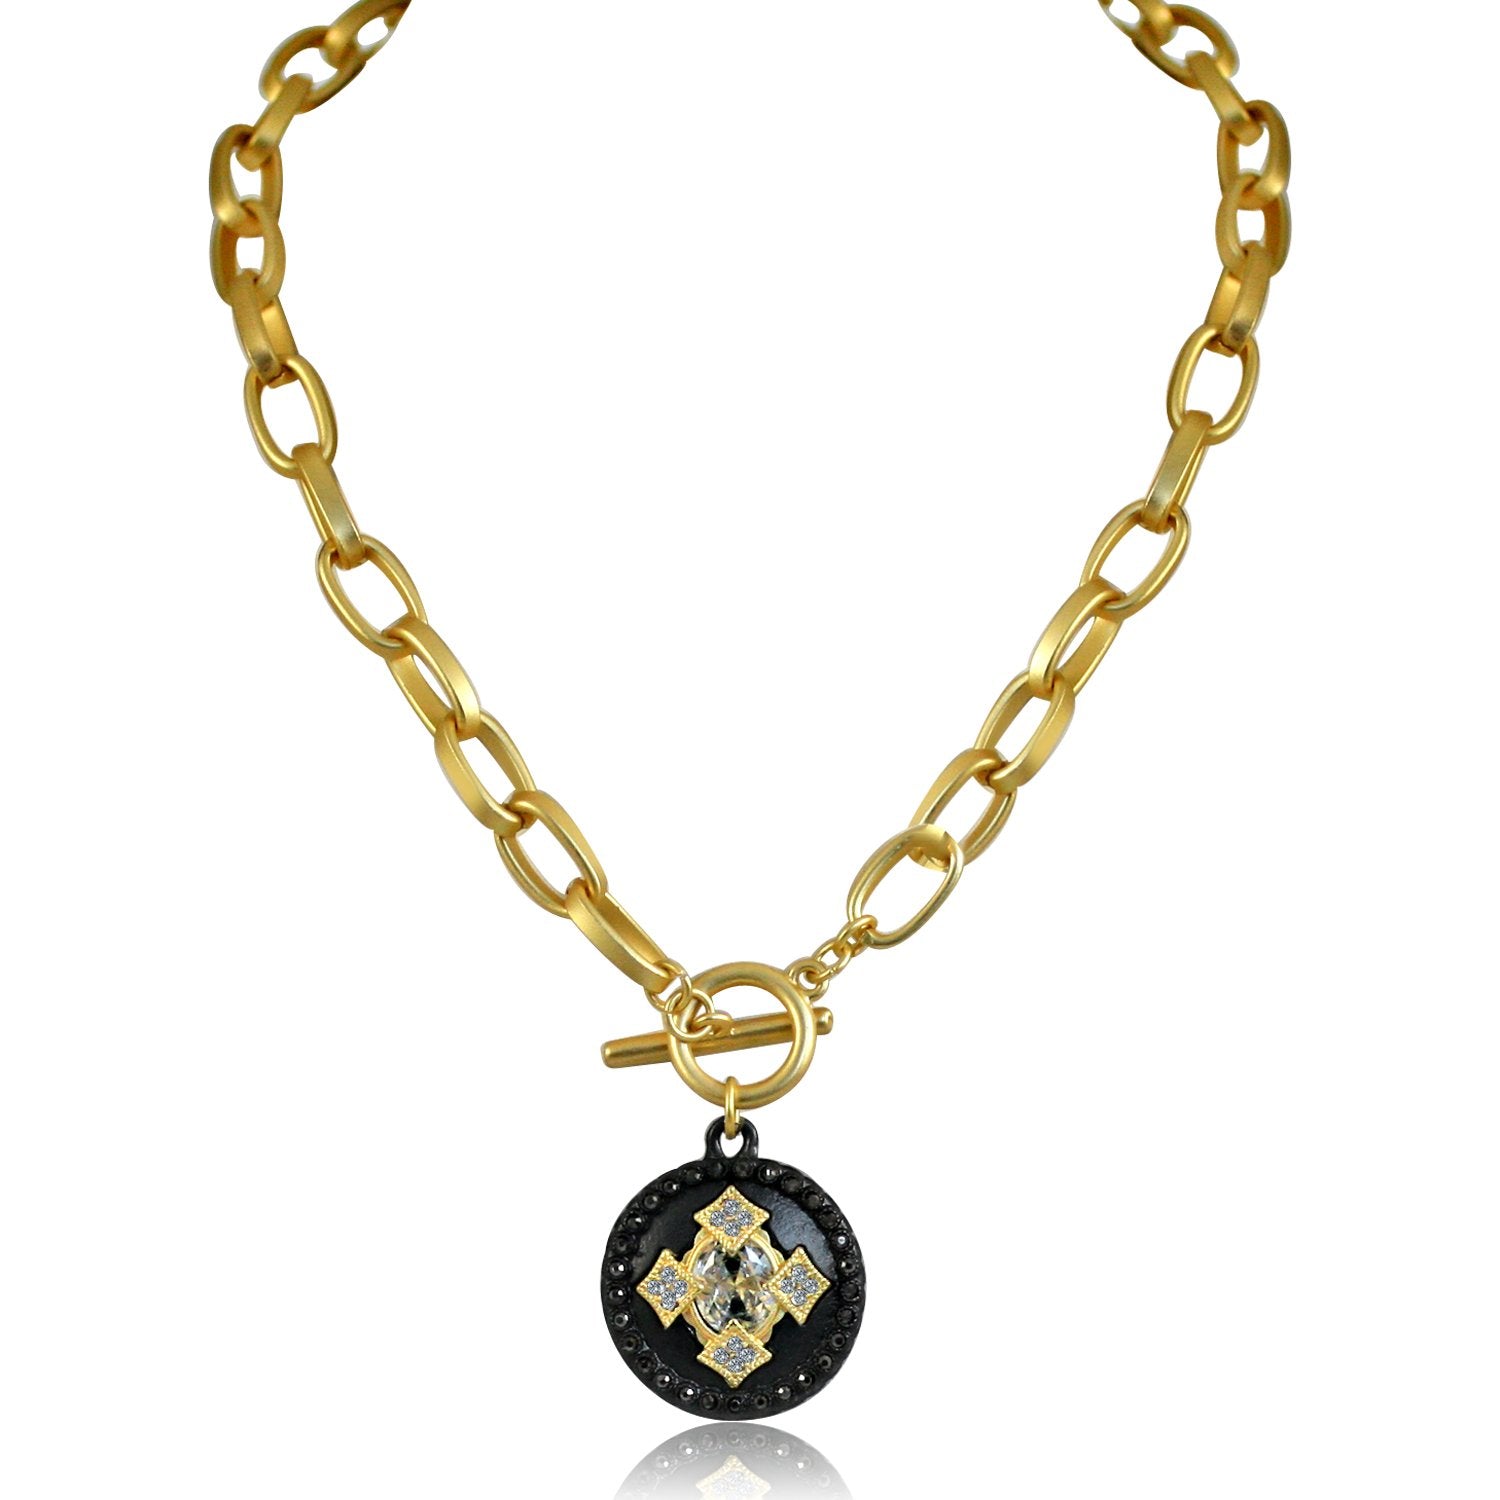 Round Black and Gold Pendant Paved with Black Diamond and Cubic Zirconia w/ Big Center Stone Elongated Chain Link Toggle Clasp 689N648